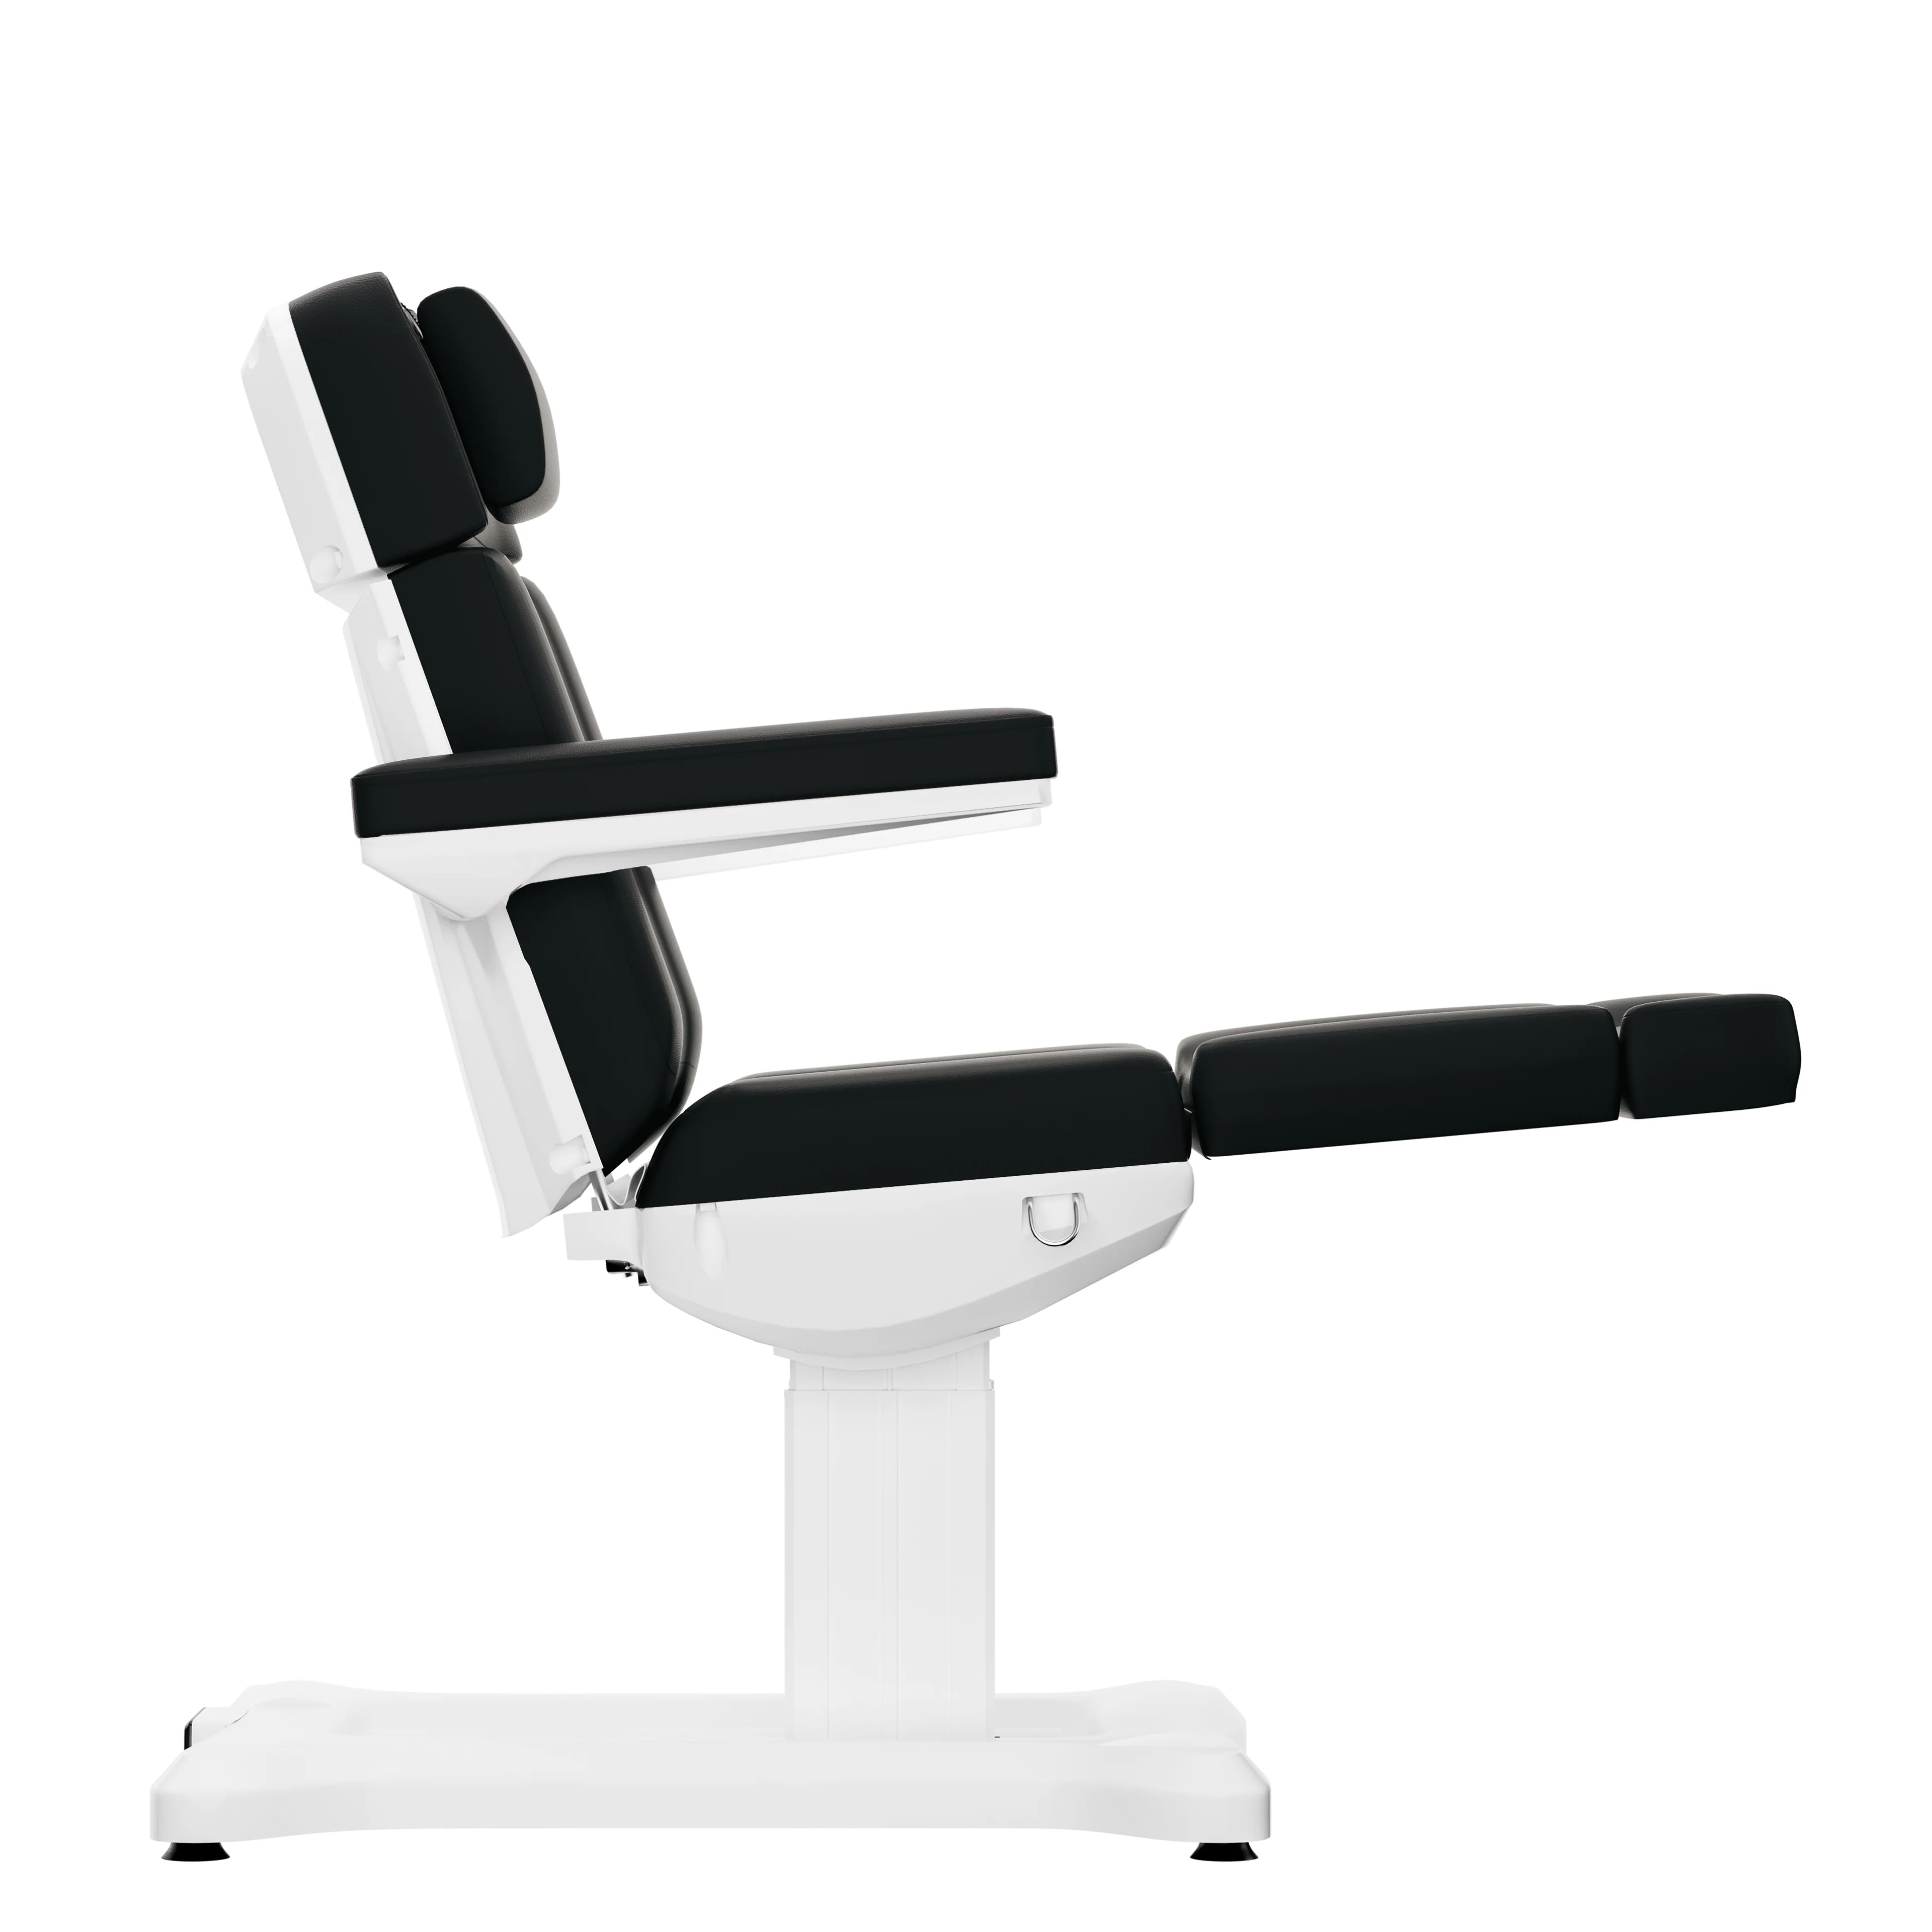 SpaMarc . Tomar (Black) . 3 Motor Spa Treatment Chair / Bed